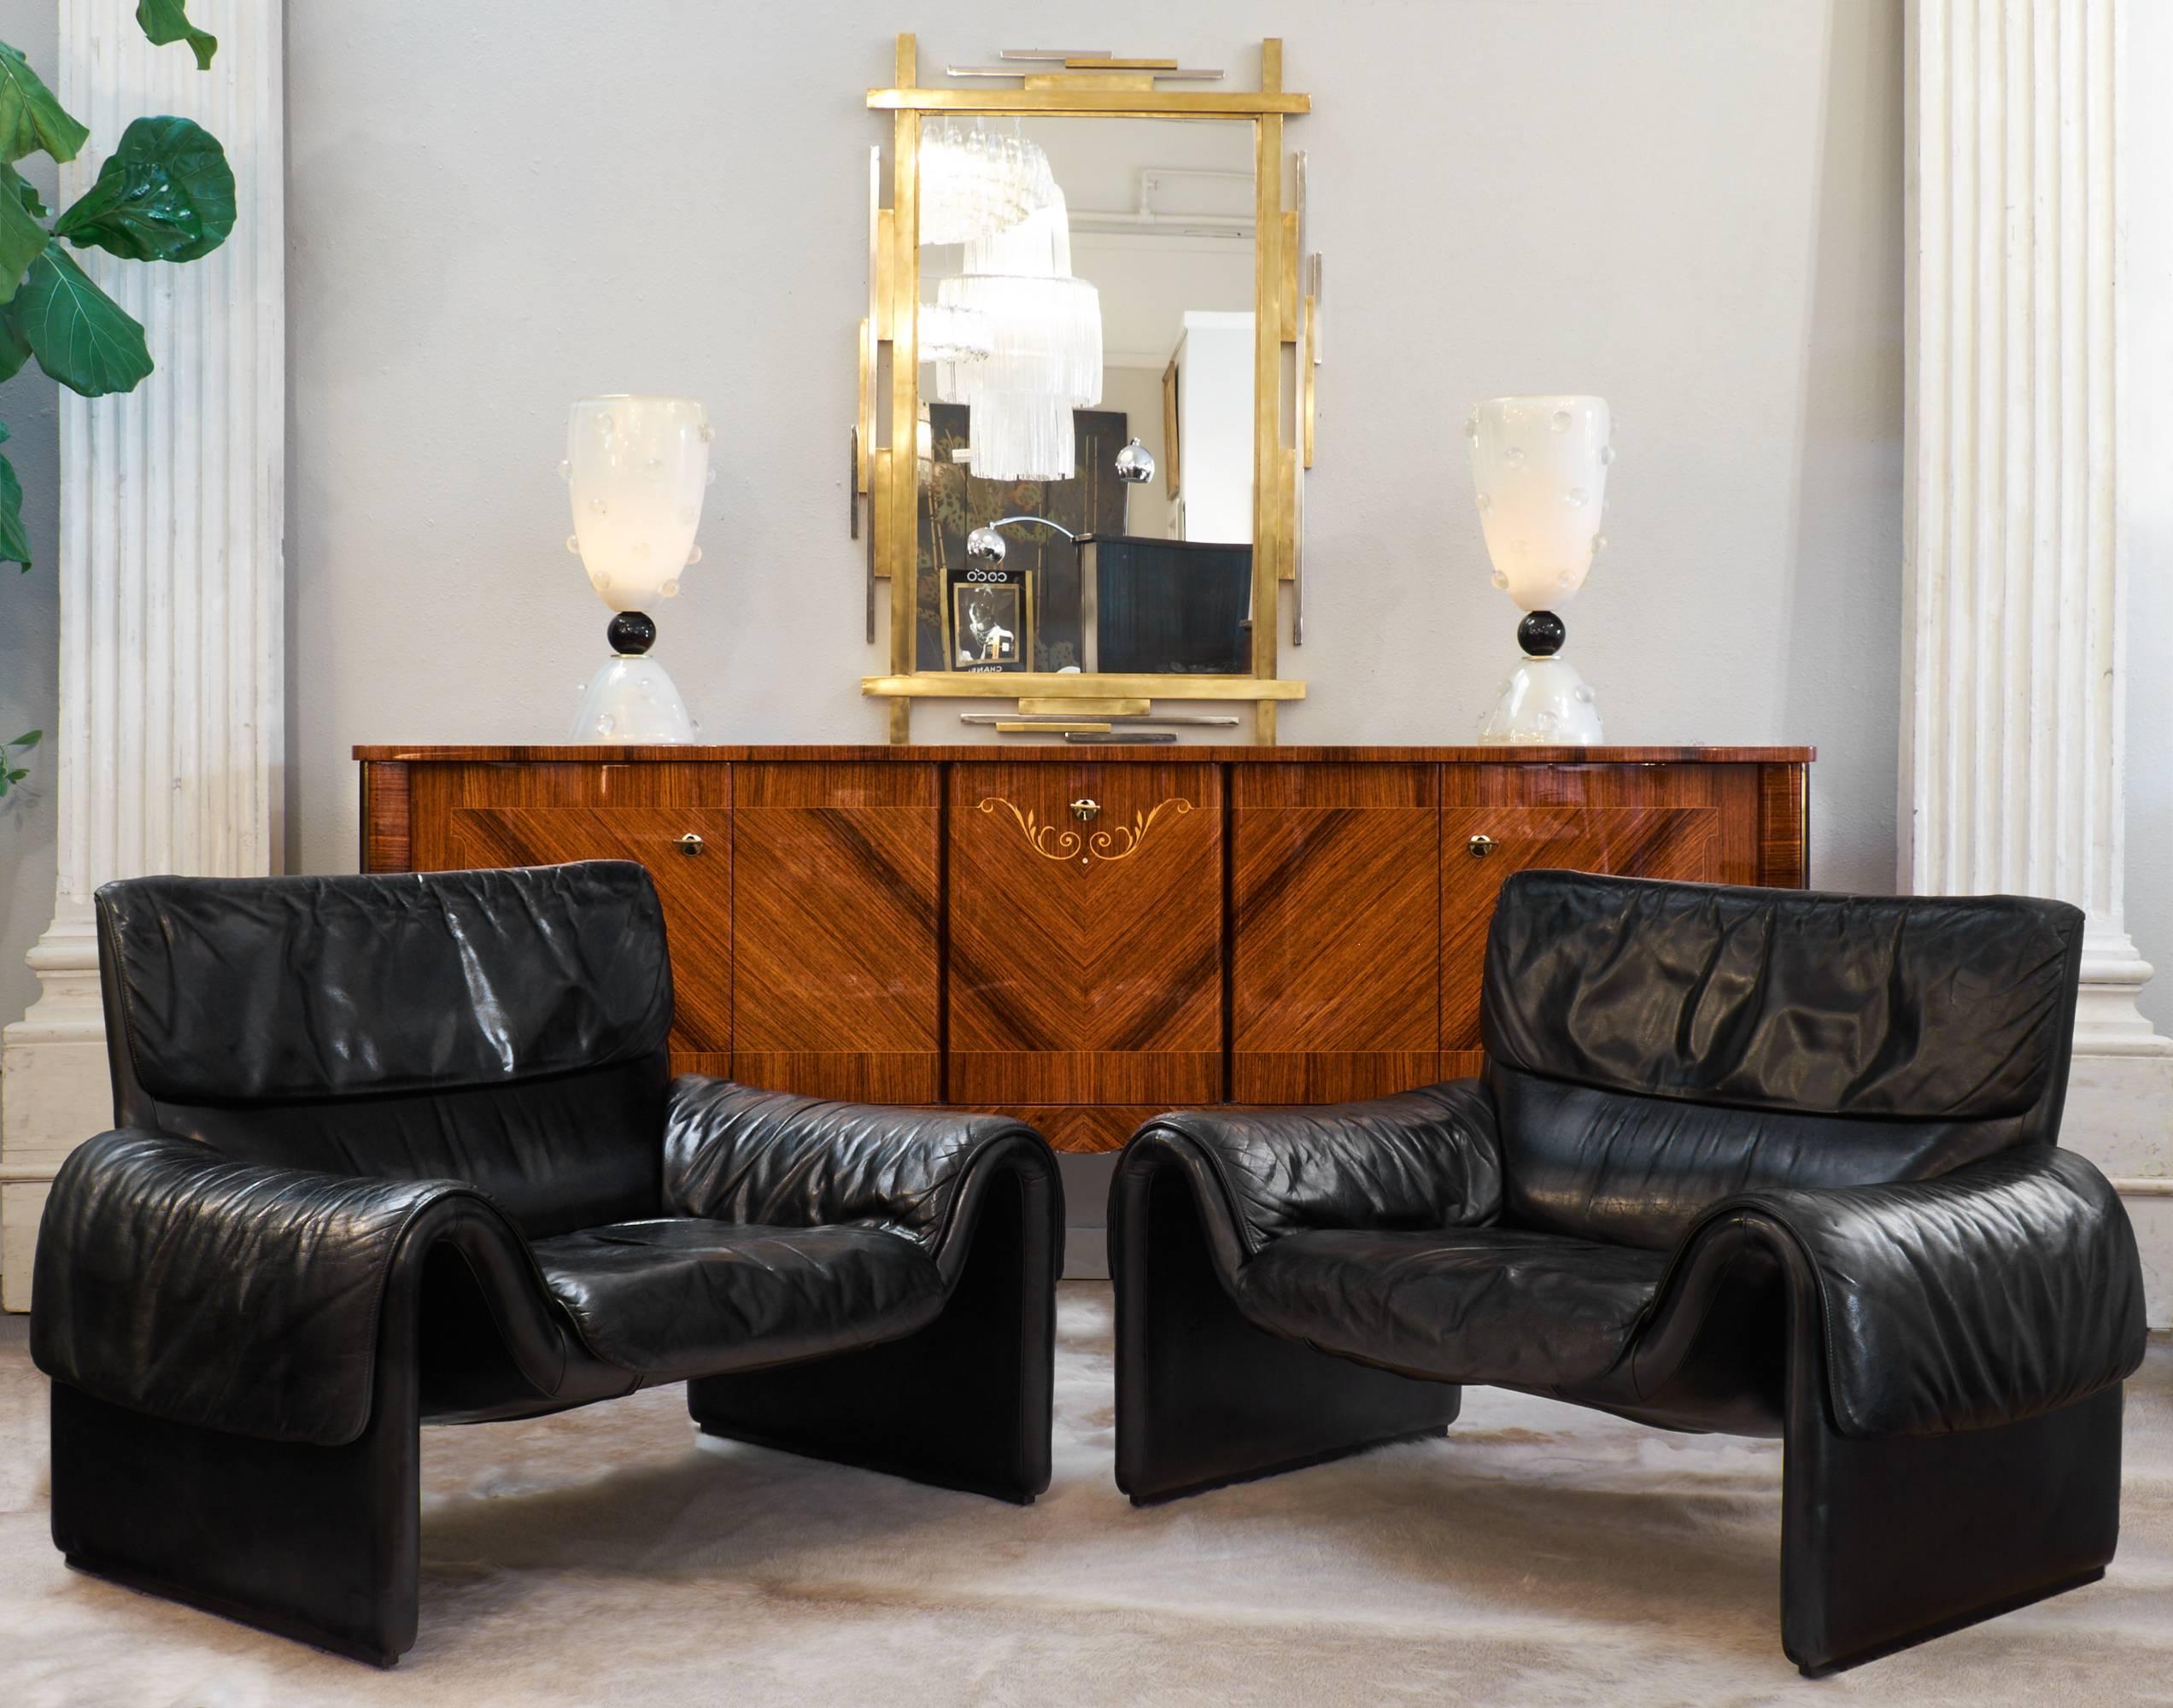 Vintage pair of black leather armchairs by De Sede, unique, beautiful front profiles, with open curving arms. Nice wide seats and comfortable backs.